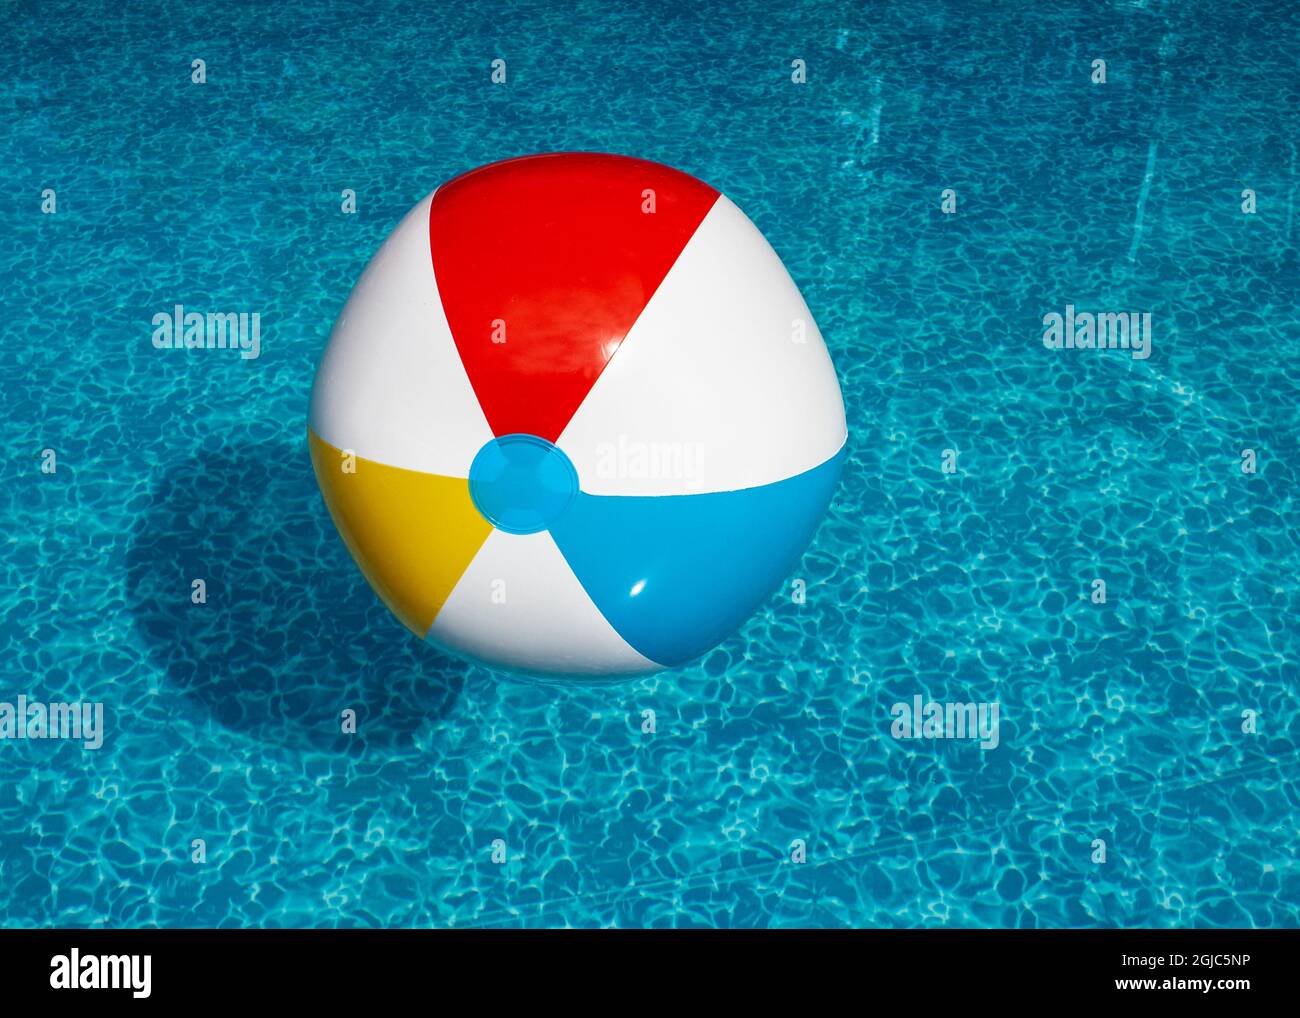 Inflatable beach ball floating in swimming pool Stock Photo